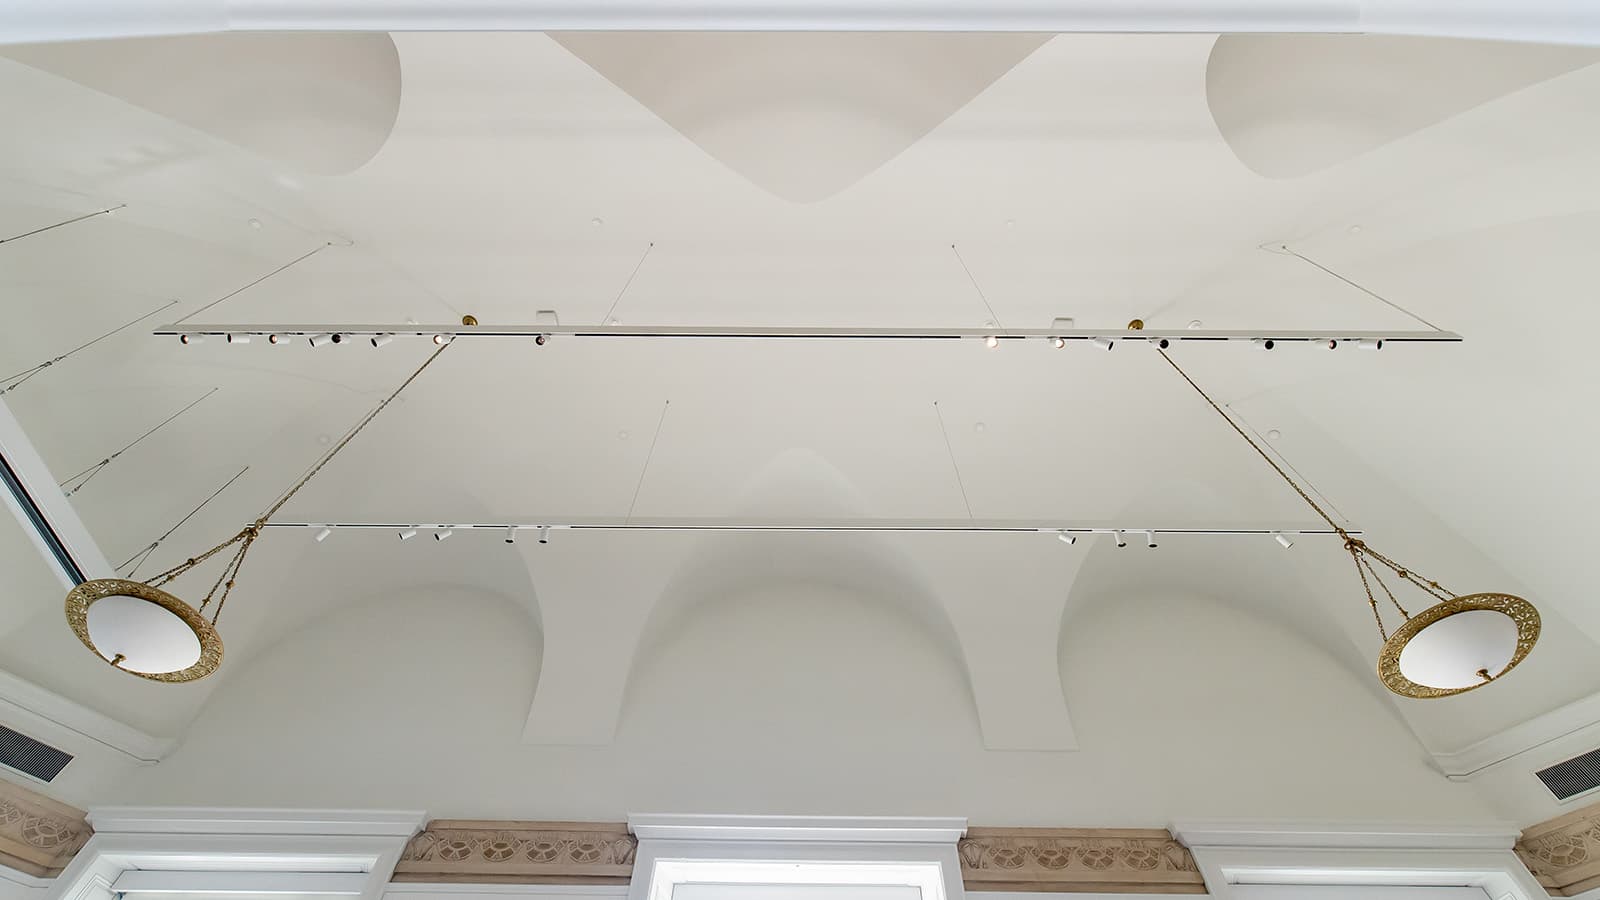 Ceiling photo of light fixtures with gold wall borders